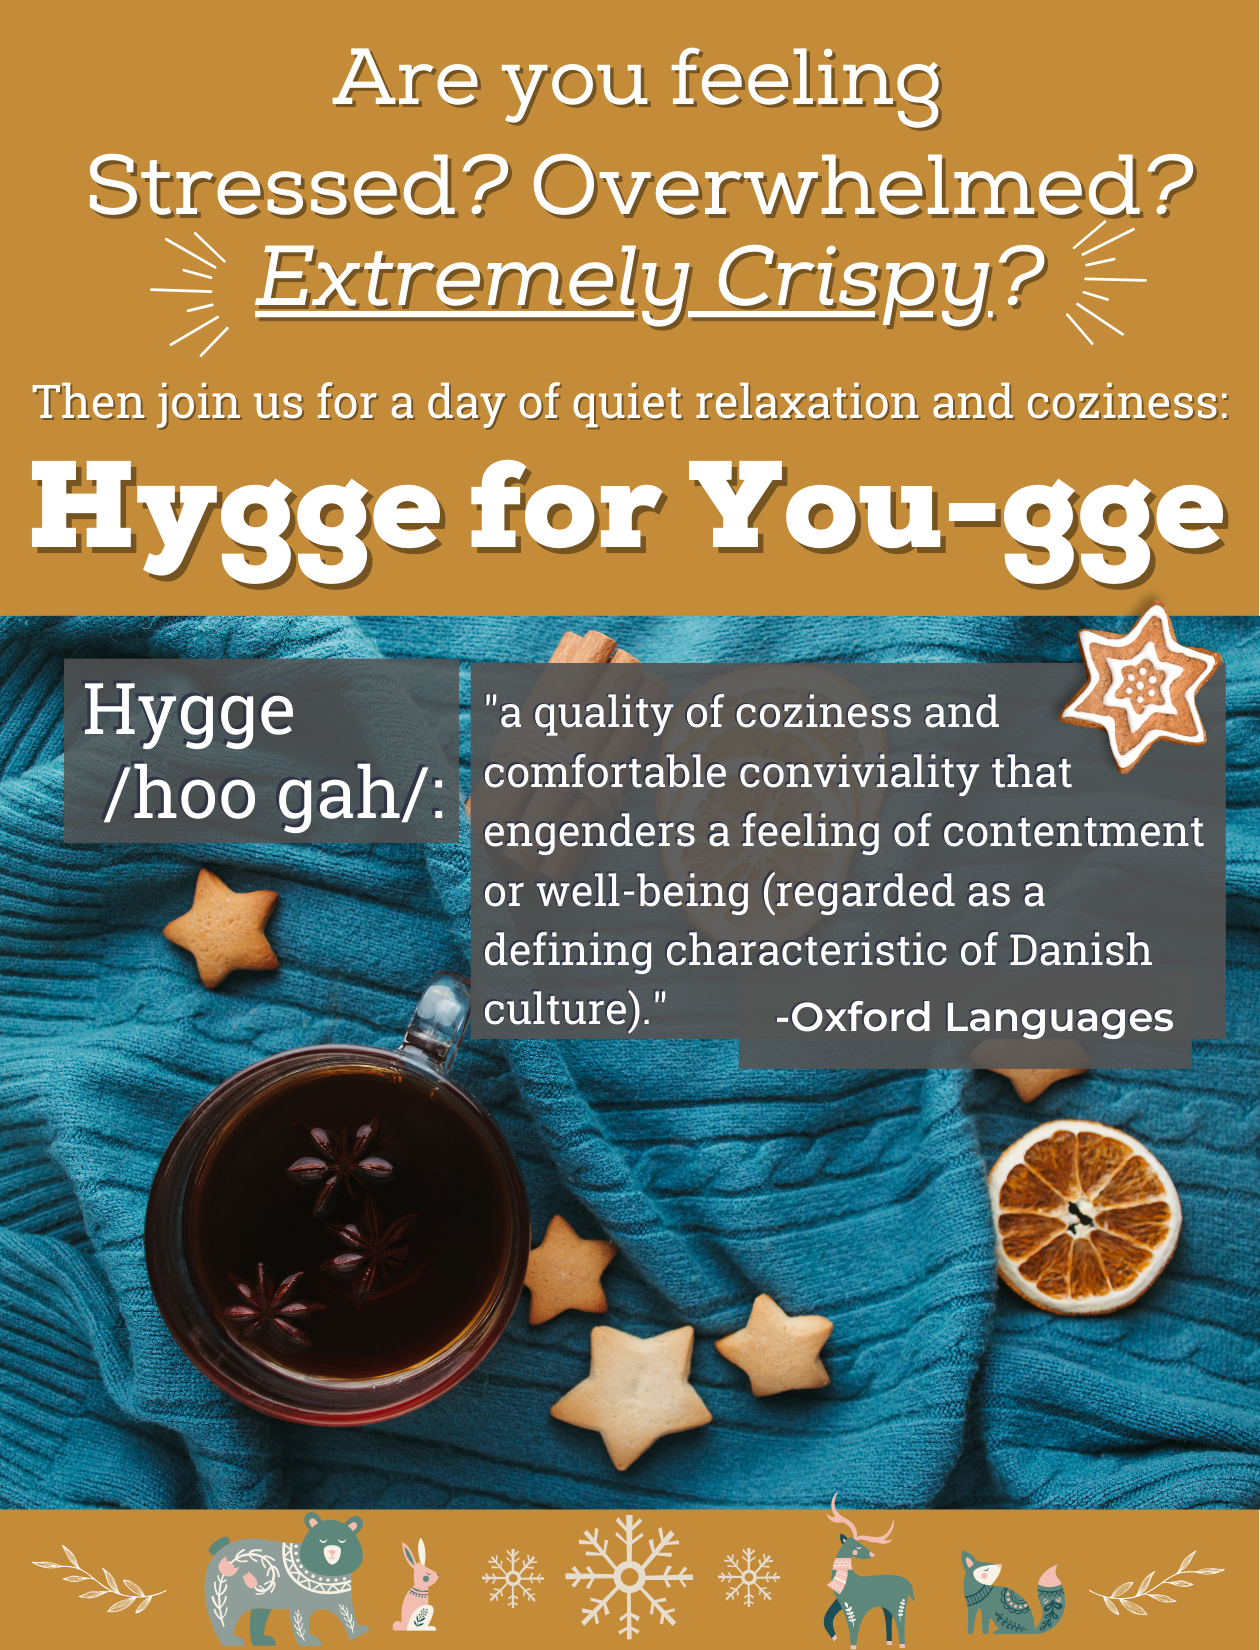 Image of a blue knit blanket with a cup of tea and sugar cookies and dried orange slices. Text reads "Are you feeling stressed? Overwhelmed? Extremely crispy? Then join us for a day of quiet relaxation and coziness: Hygge for You-gge!" under that is the Oxford English Dictionary definition of "hygge" as "a quality of coziness and comfortable conviviality that engenders a feeling of contentment or well-being (regarded as a defining characteristic of Danish culture)." 